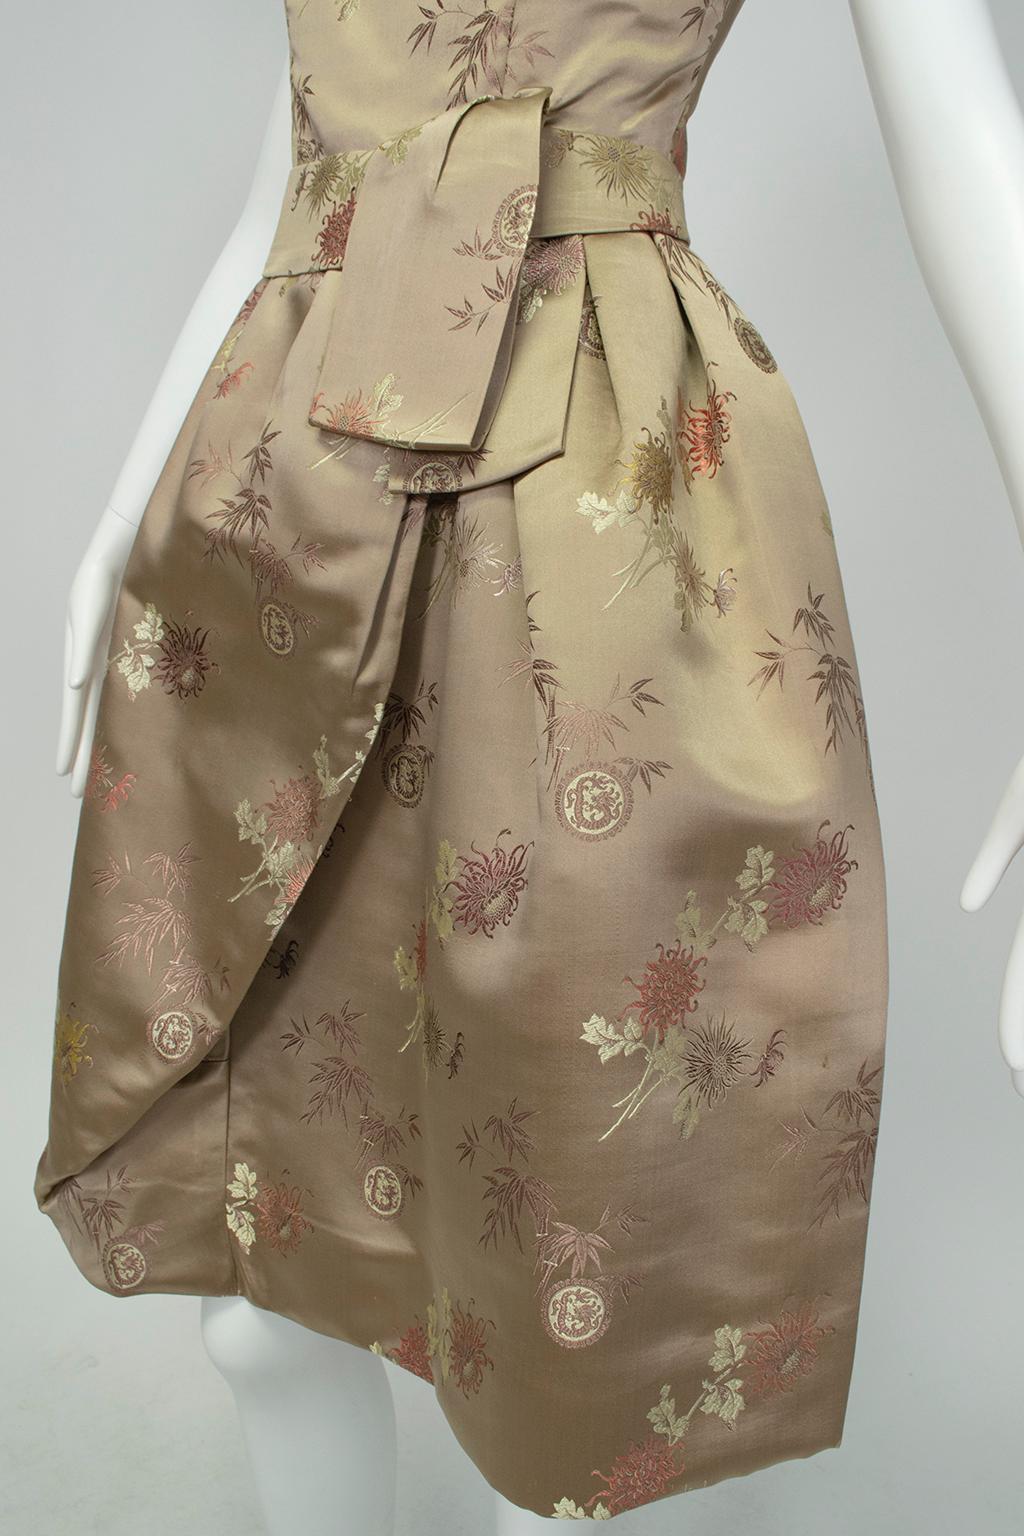 Jacques Cassia Haute Couture Taupe Brocade Corolle Tulip Skirt Dress - S, 1960s For Sale 4